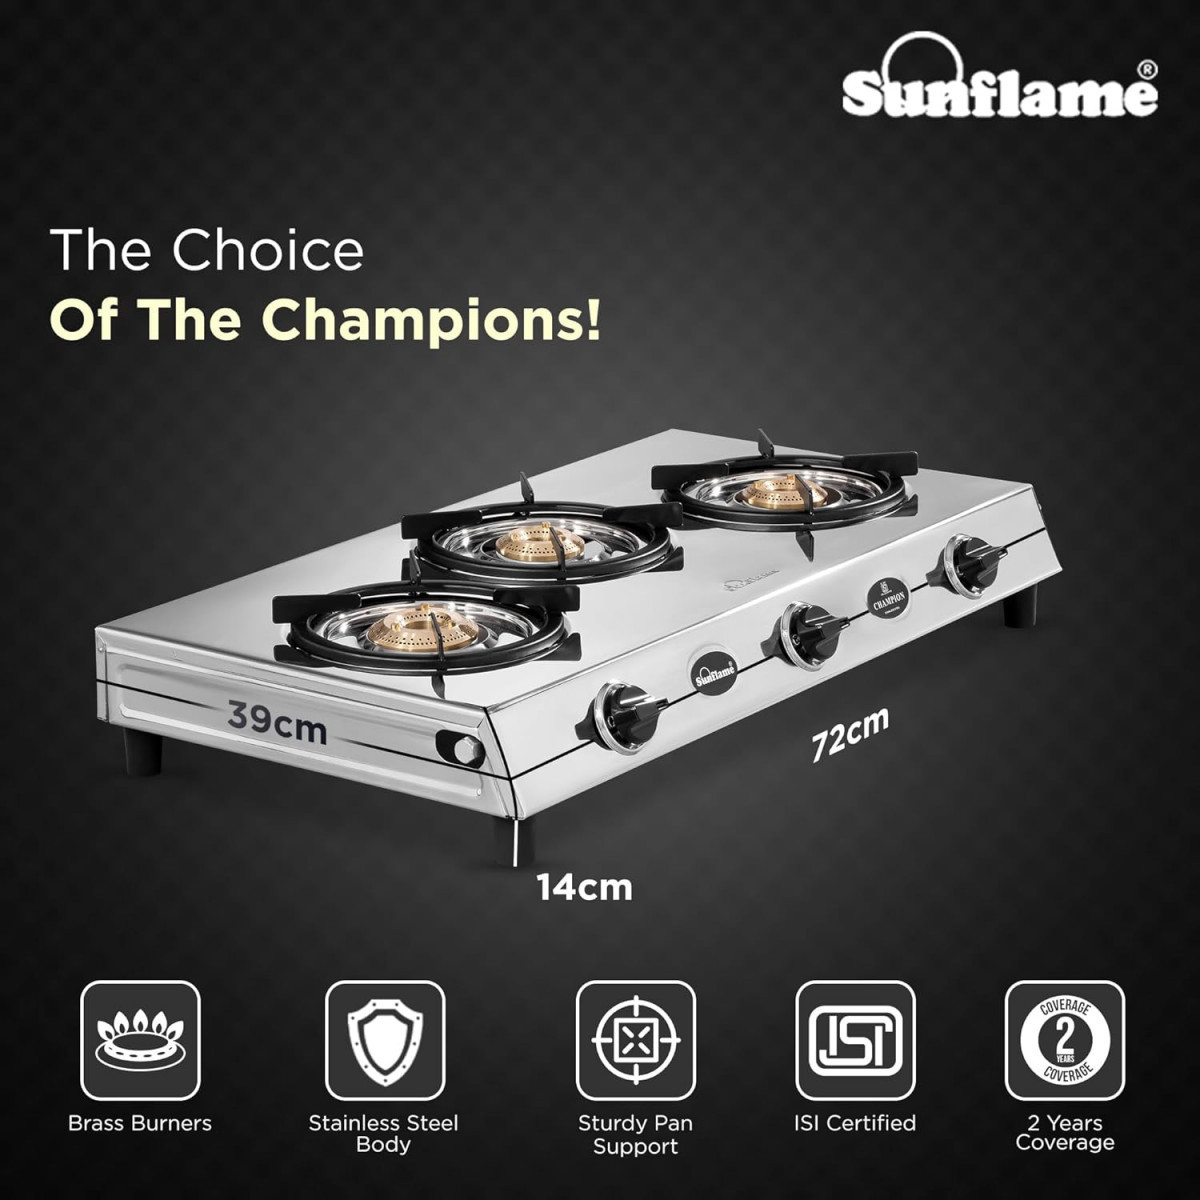 Sunflame Champion 3-Burner Gas Stove  Stainless Steel Body  2-Years Product Coverage  1 Medium and 2 Small Brass Burners Euro-Coated Pan Supports  Manual Ignition  Silver